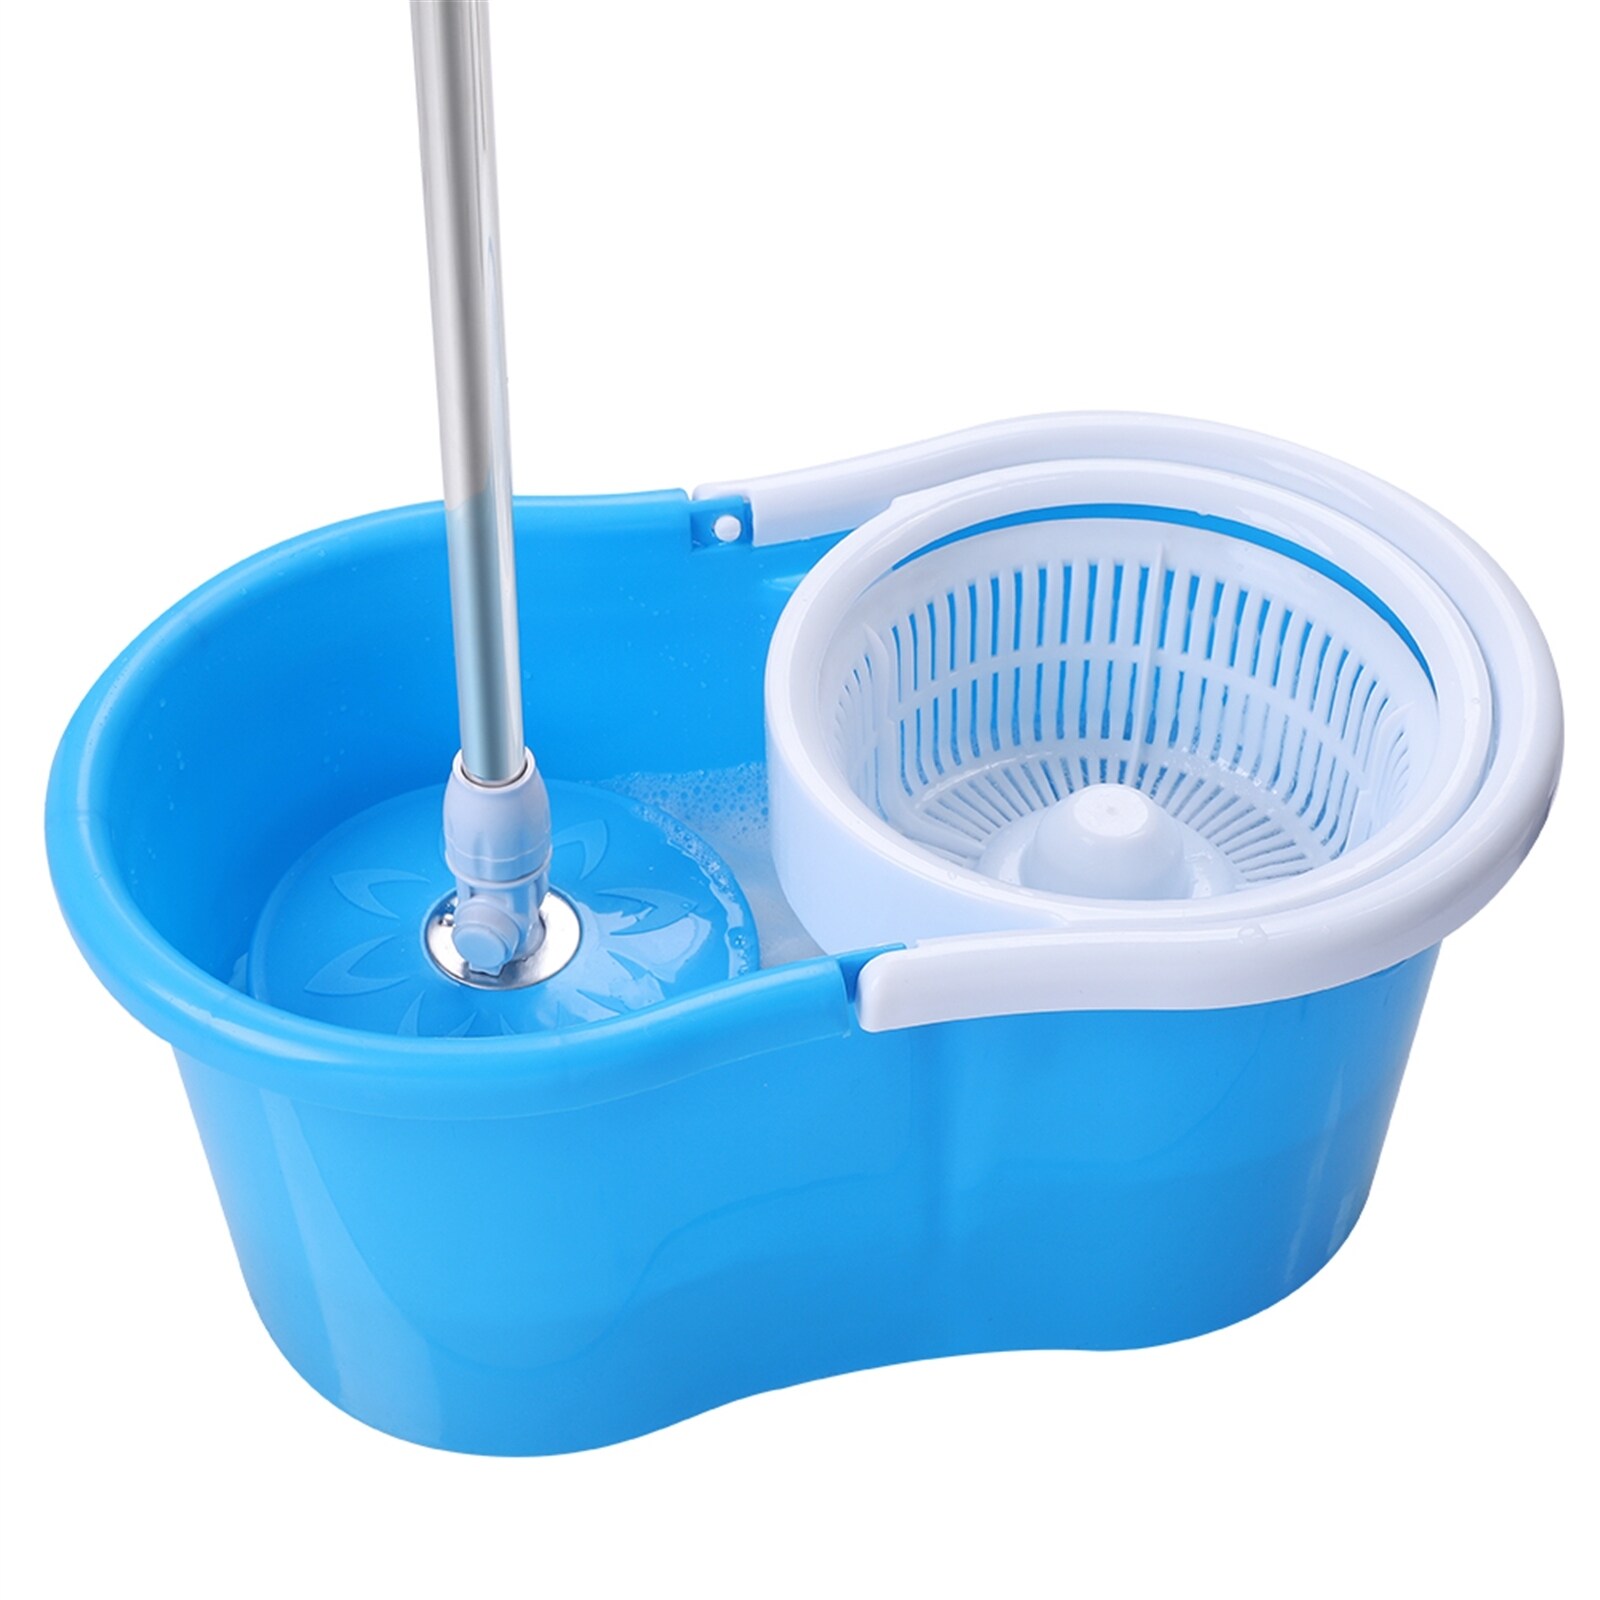 https://ak1.ostkcdn.com/images/products/is/images/direct/43b8b2830f6d0112866fa4aa1369ab49670cc18f/360%C2%B0-Spin-Mop-with-Bucket-%26-Dual-Mop-Heads.jpg